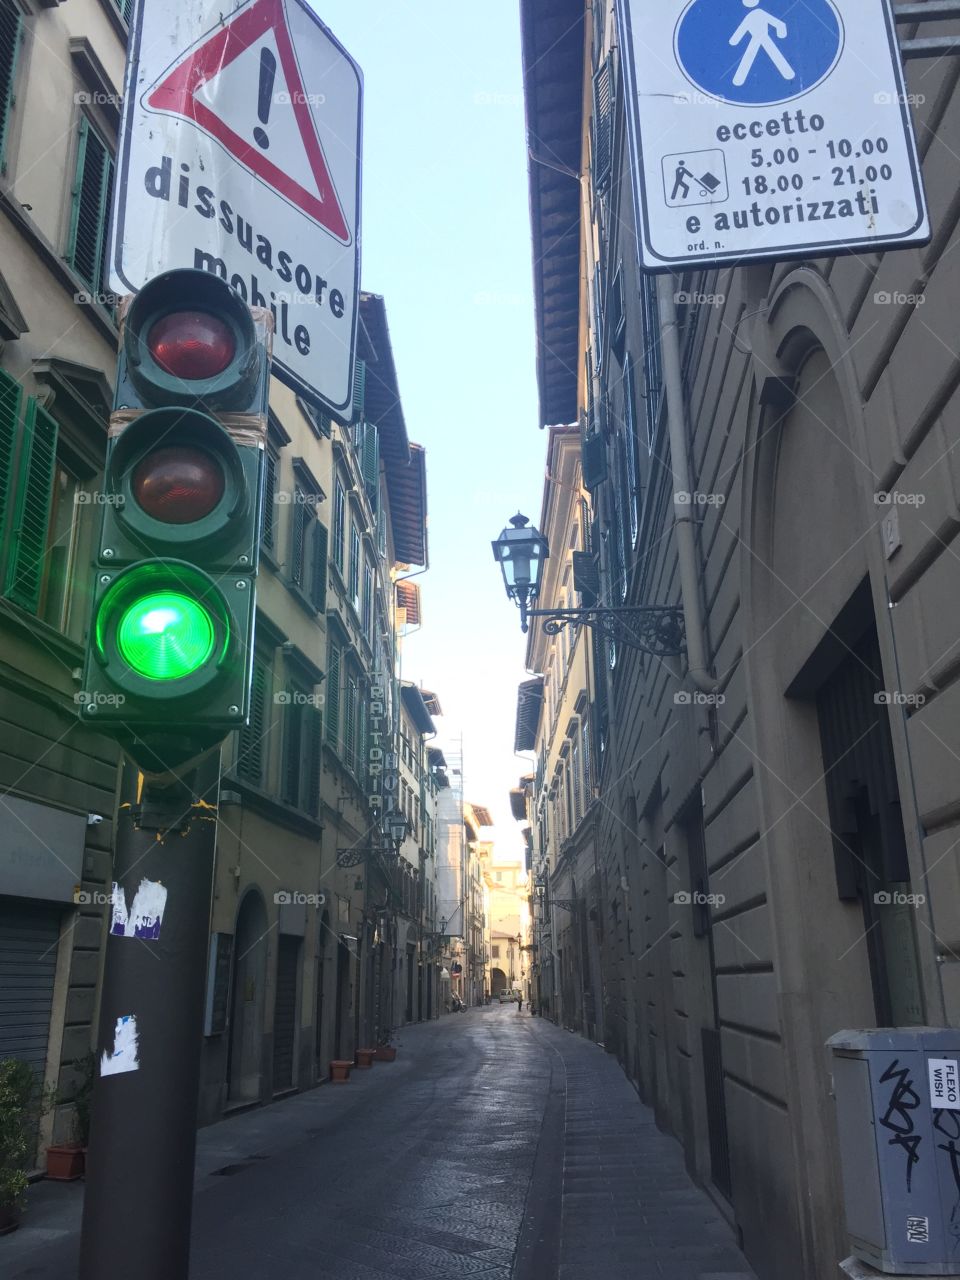 The streets of Firenze, Italy 